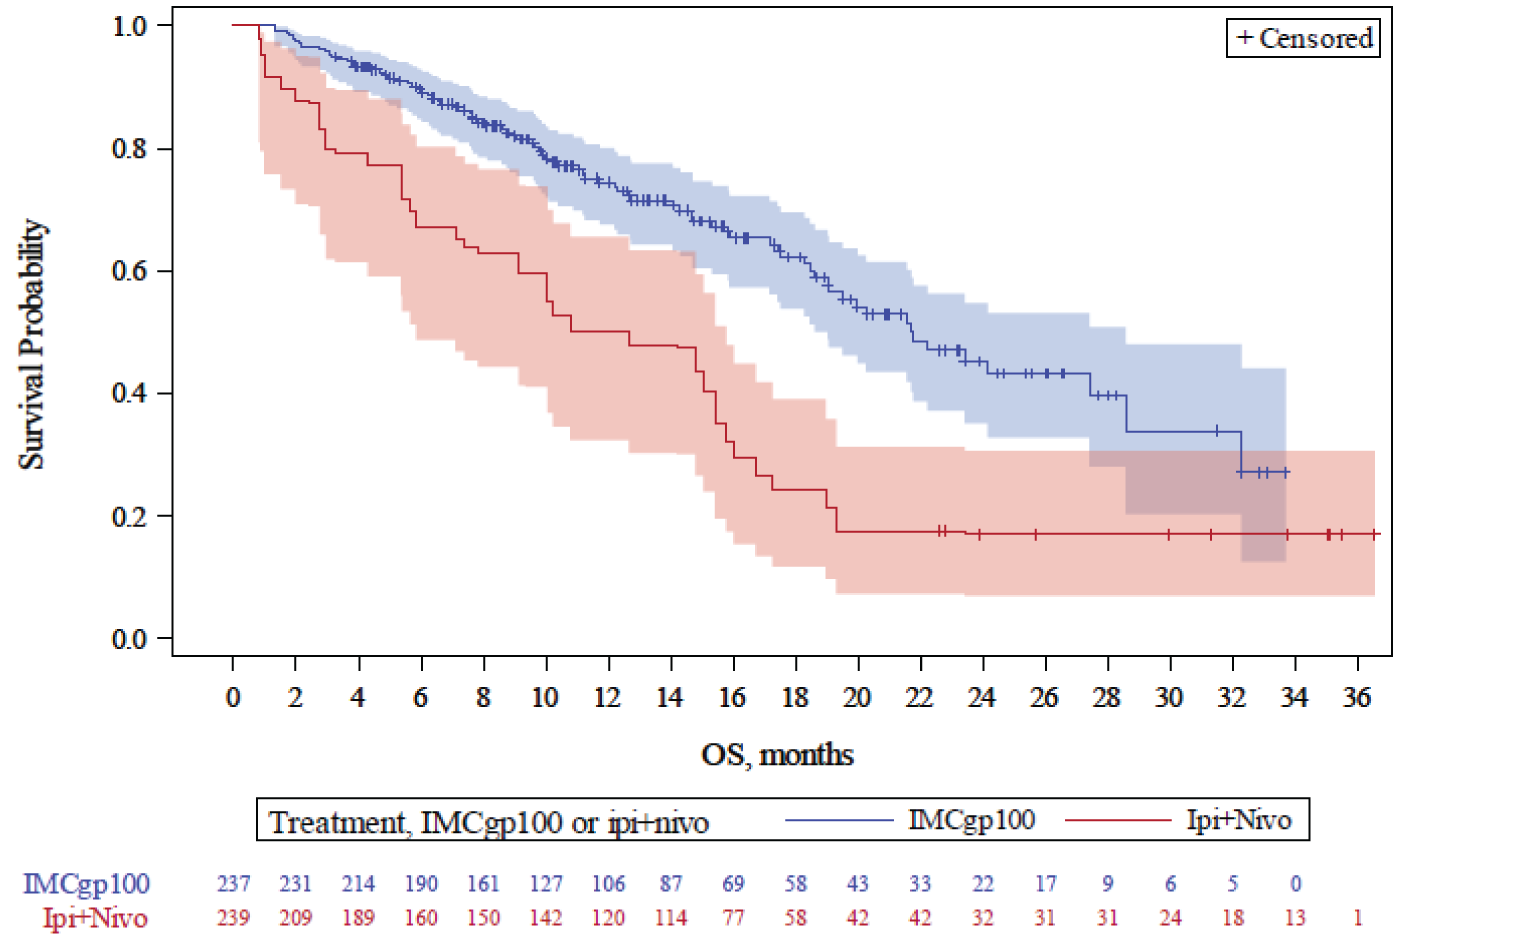 KM plot and 95% CI bands for postweight OS are shown up to approximately 34 months for the tebentafusp cohort and up to 36 months for the ipilimumab + nivolumab cohort. The curves diverge starting at month 1, with tebentafusp above ipilimumab + nivolumab. The 95% CI bands of the 2 cohorts are separated at most time points until month 28, after which a significant overlap begins to occur.